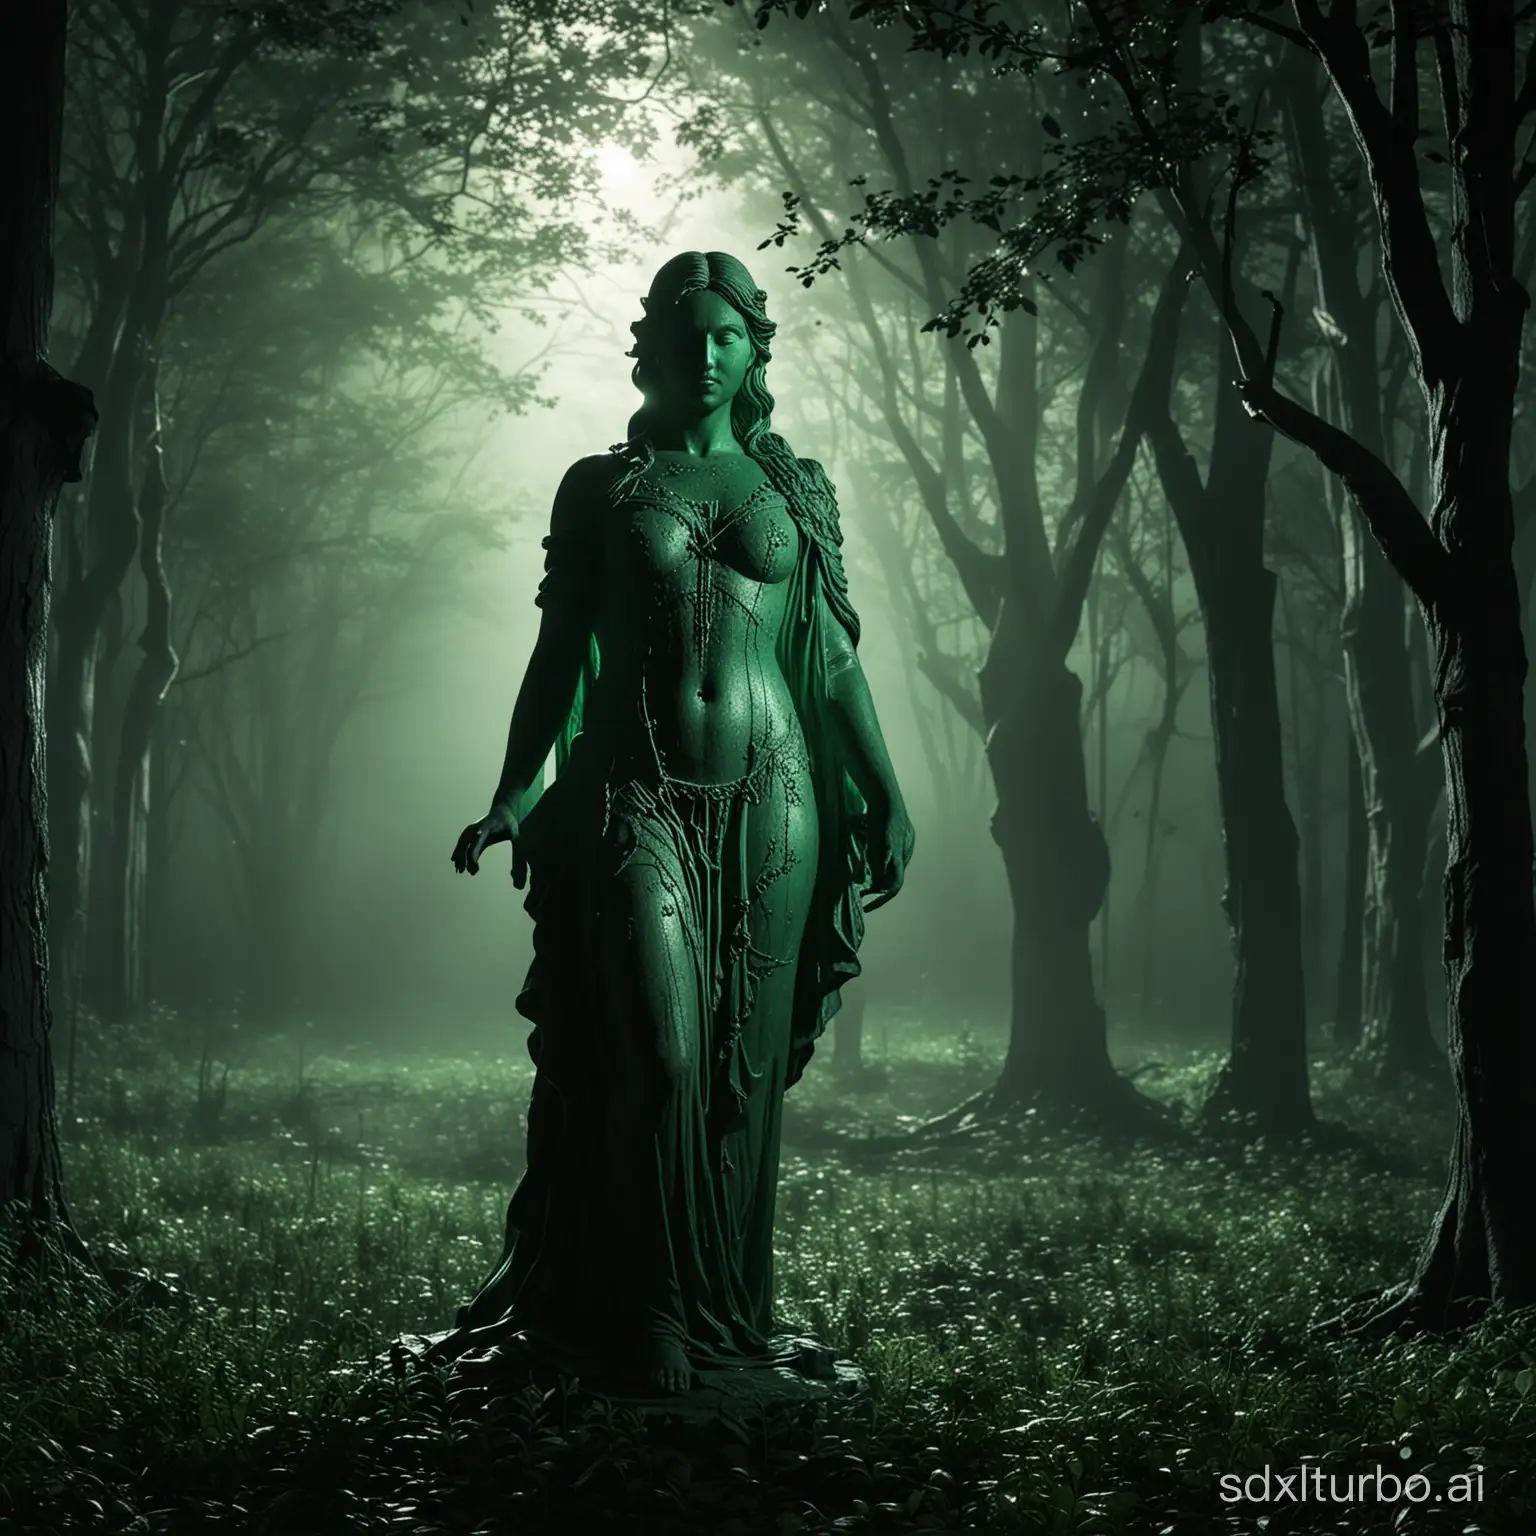 Enchanting-Sculpture-Illuminated-by-Green-Light-in-Night-Forest